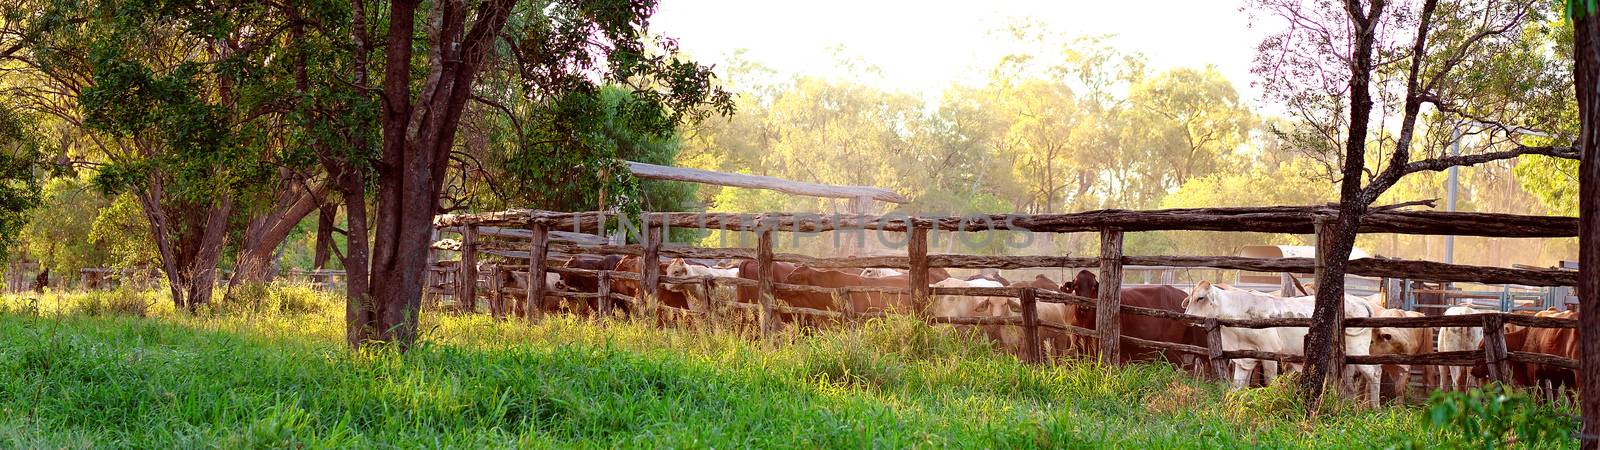 Cattle being round up into yards in late afternoon light, ready for droving to another property in the morning